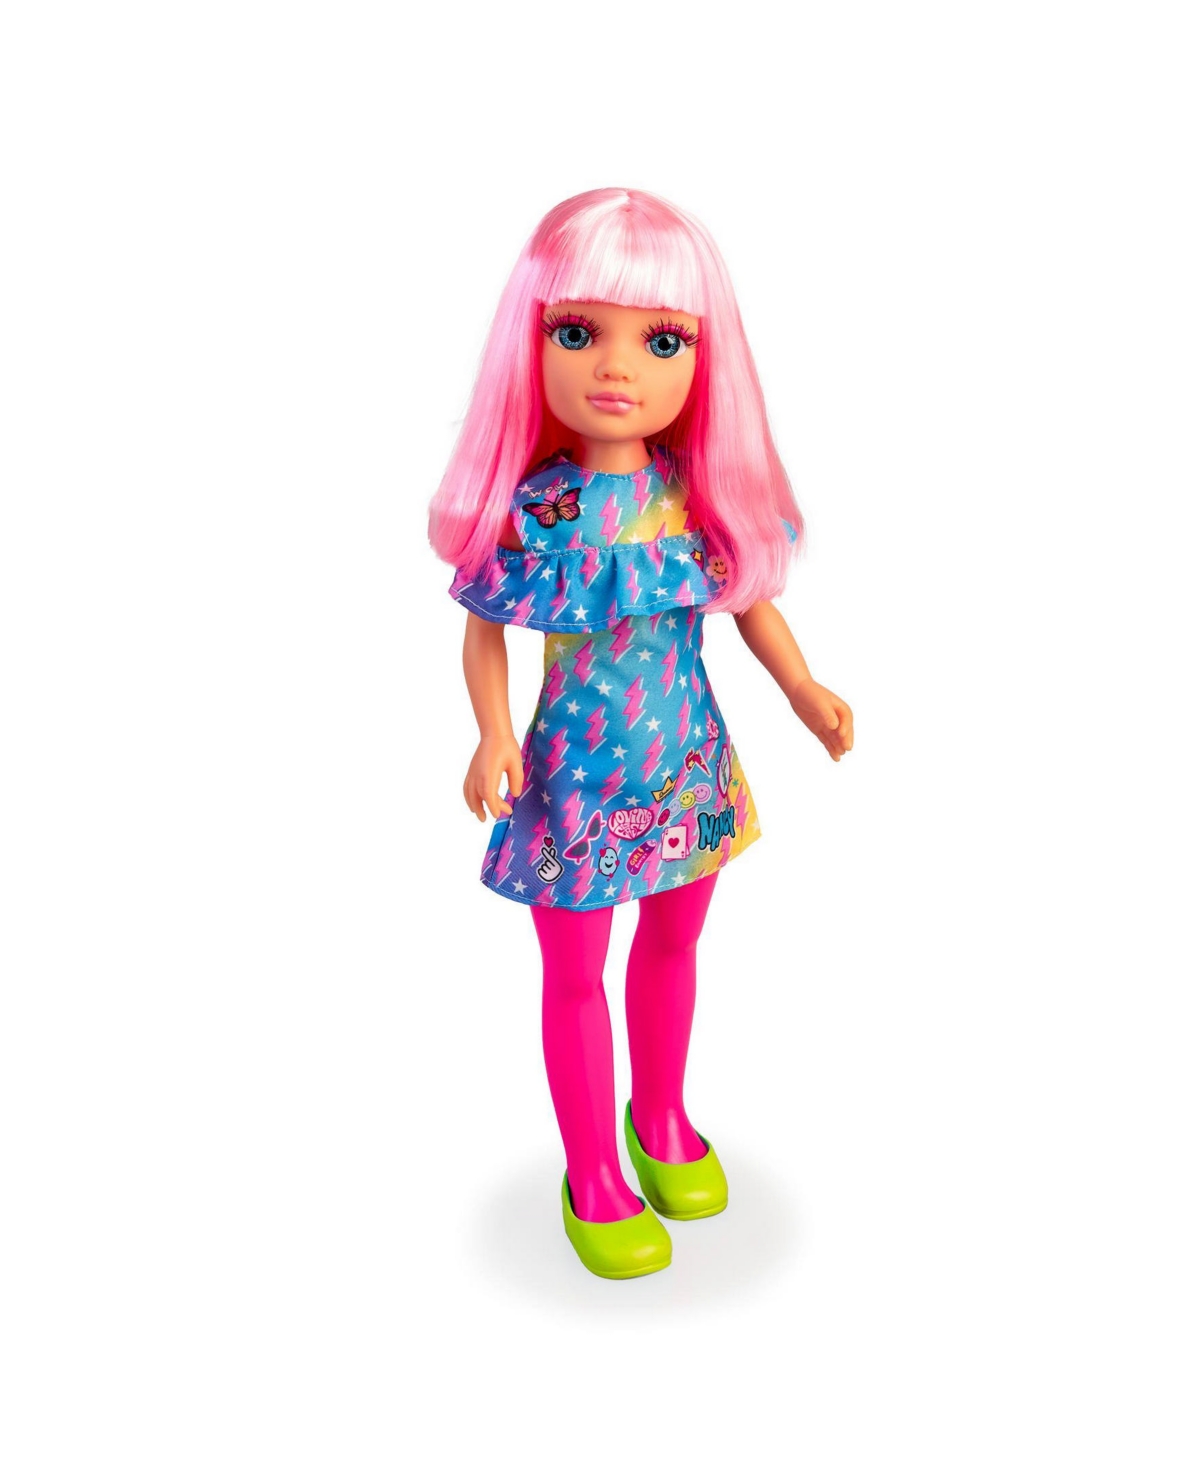 Nancy Neon Fashion Doll With Pink Hair In Multicolor